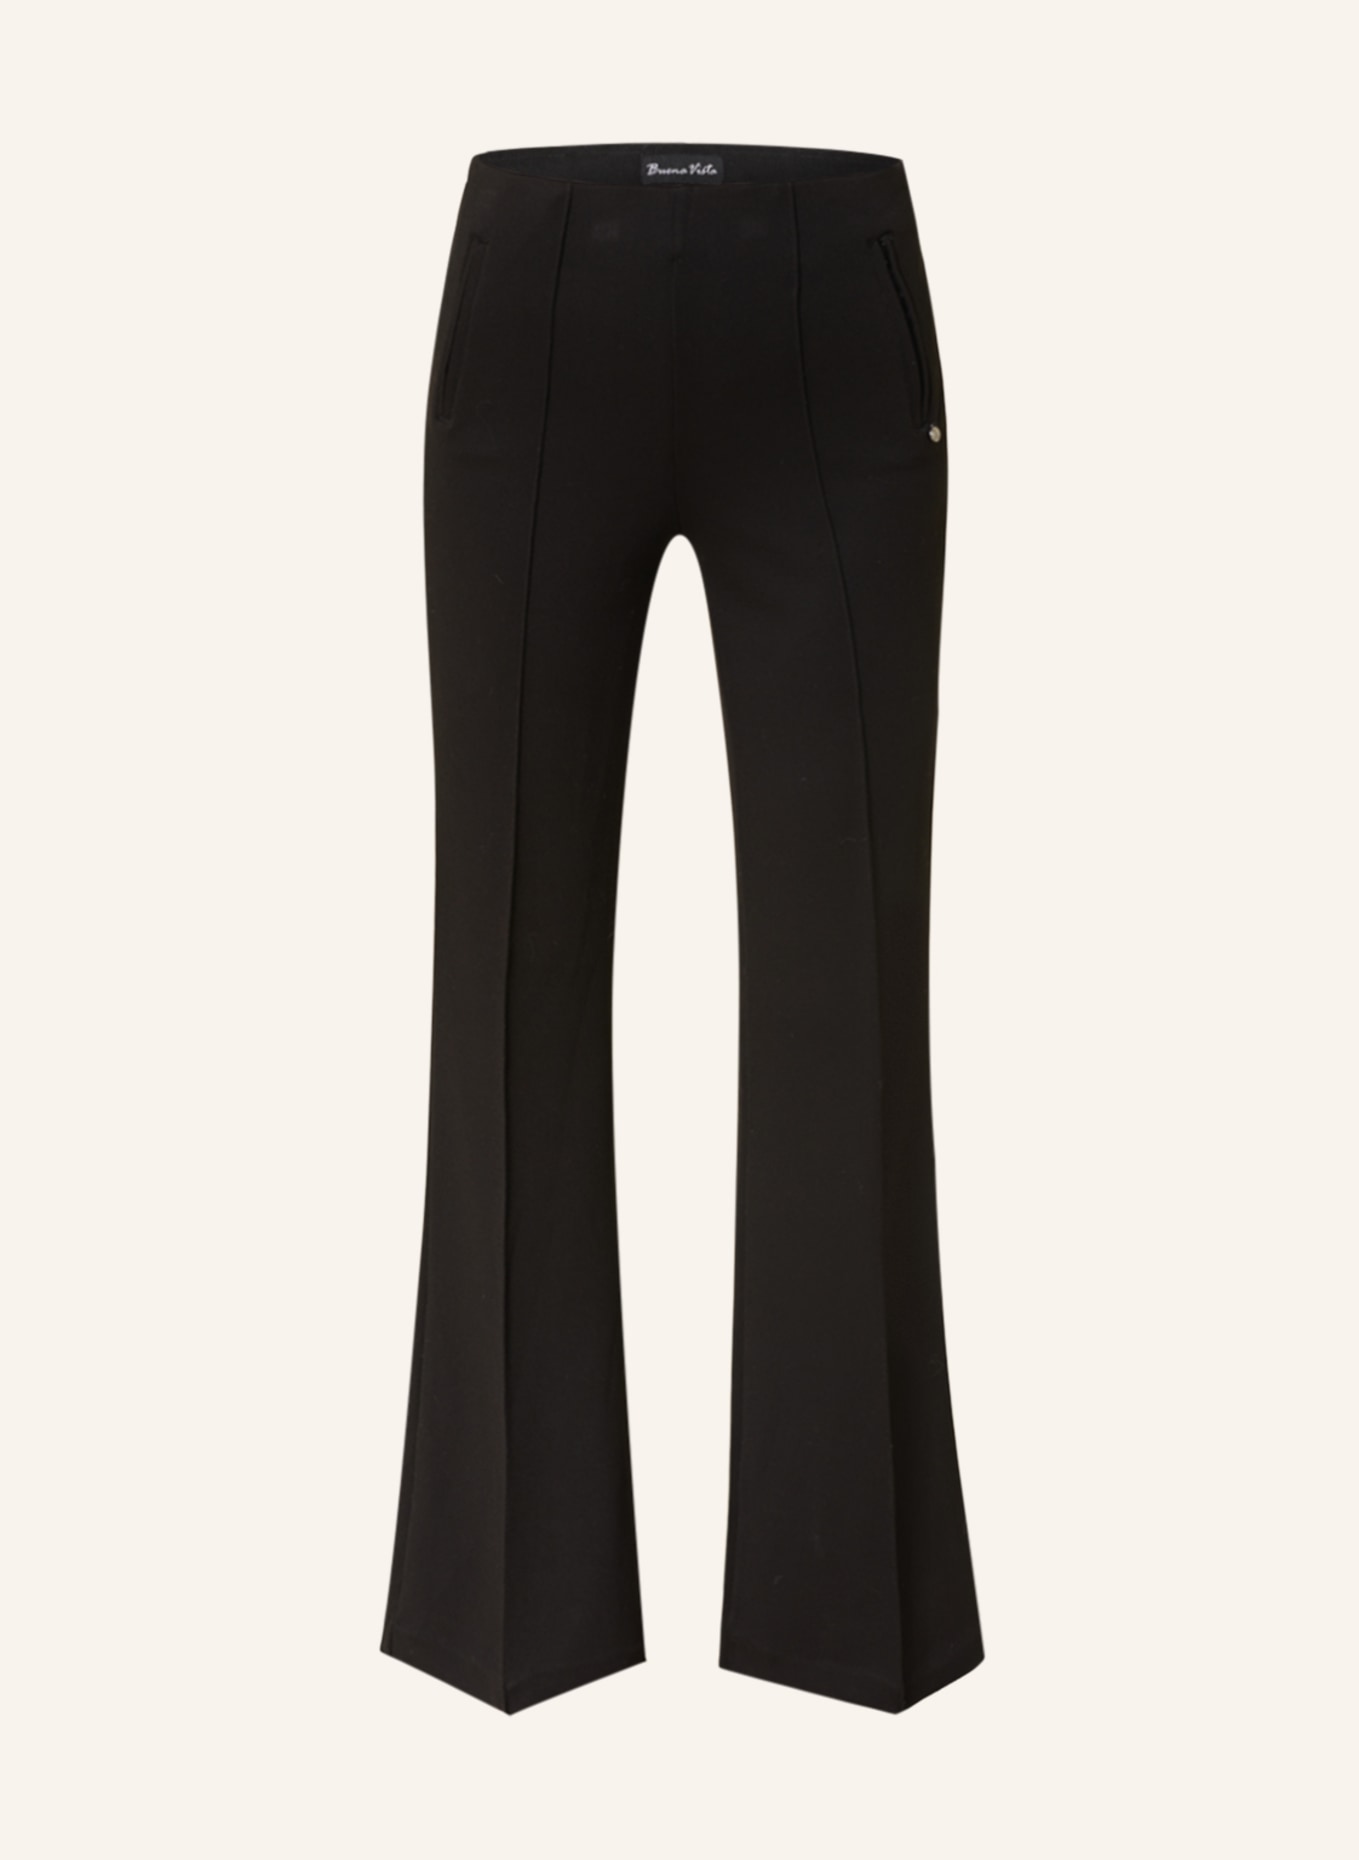 Basic Black Jersey Flared Trousers Trousers, 55% OFF